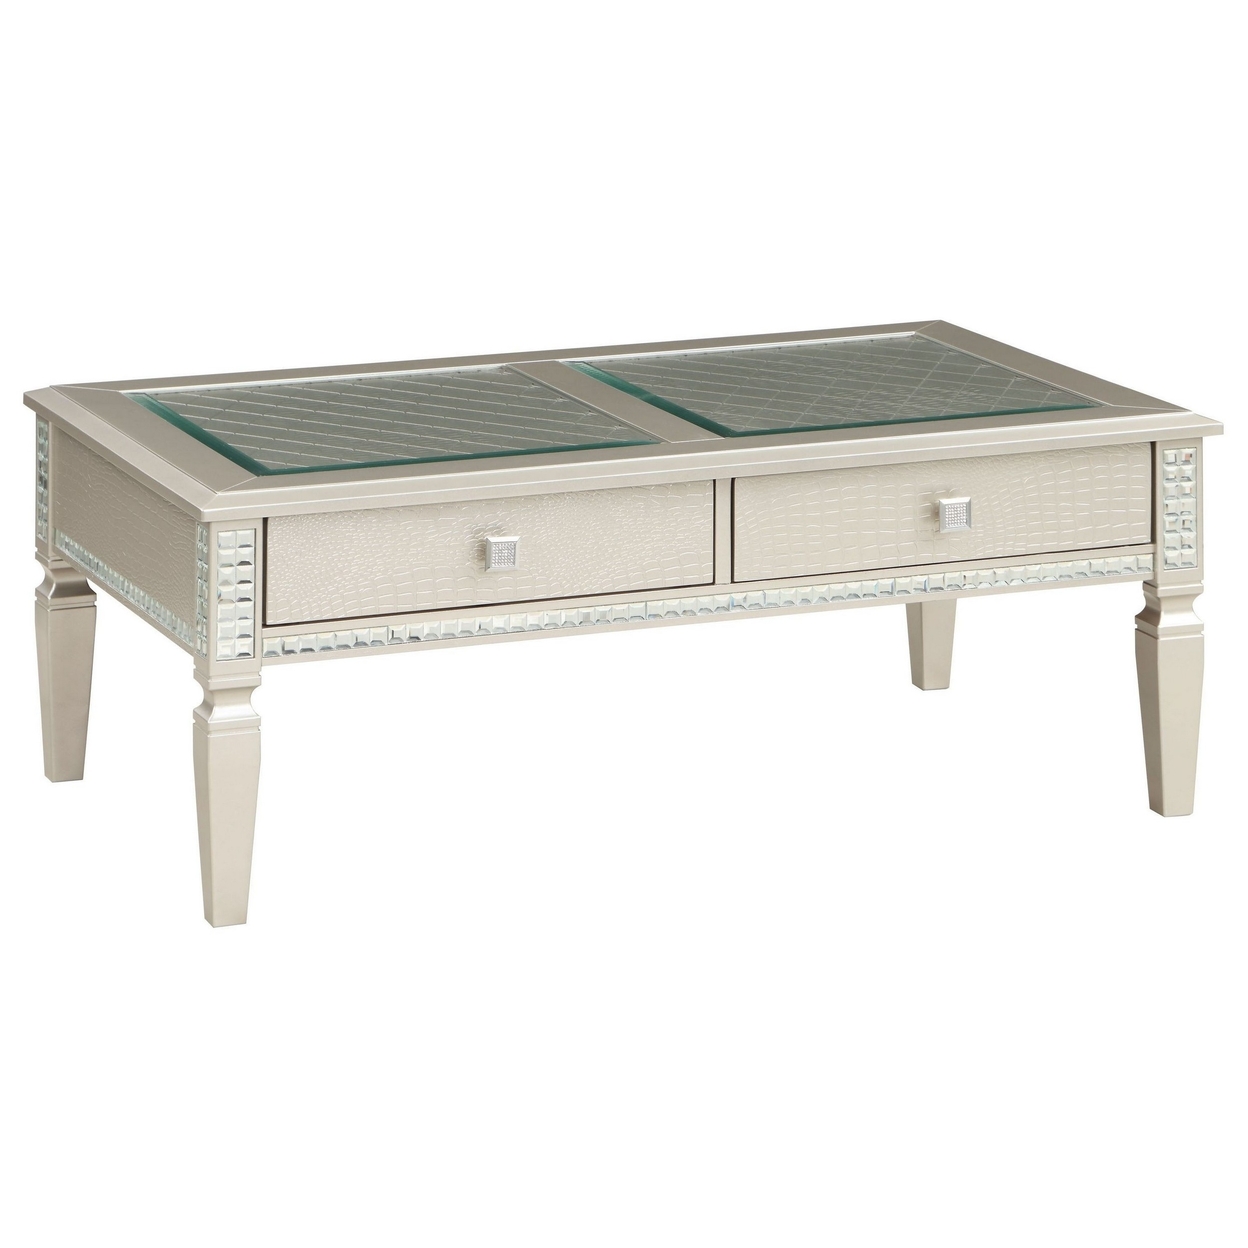 Trace 48 Inch Coffee Table, Tempered Glass Top, 2 Drawers, Mirror Inserts- Saltoro Sherpi